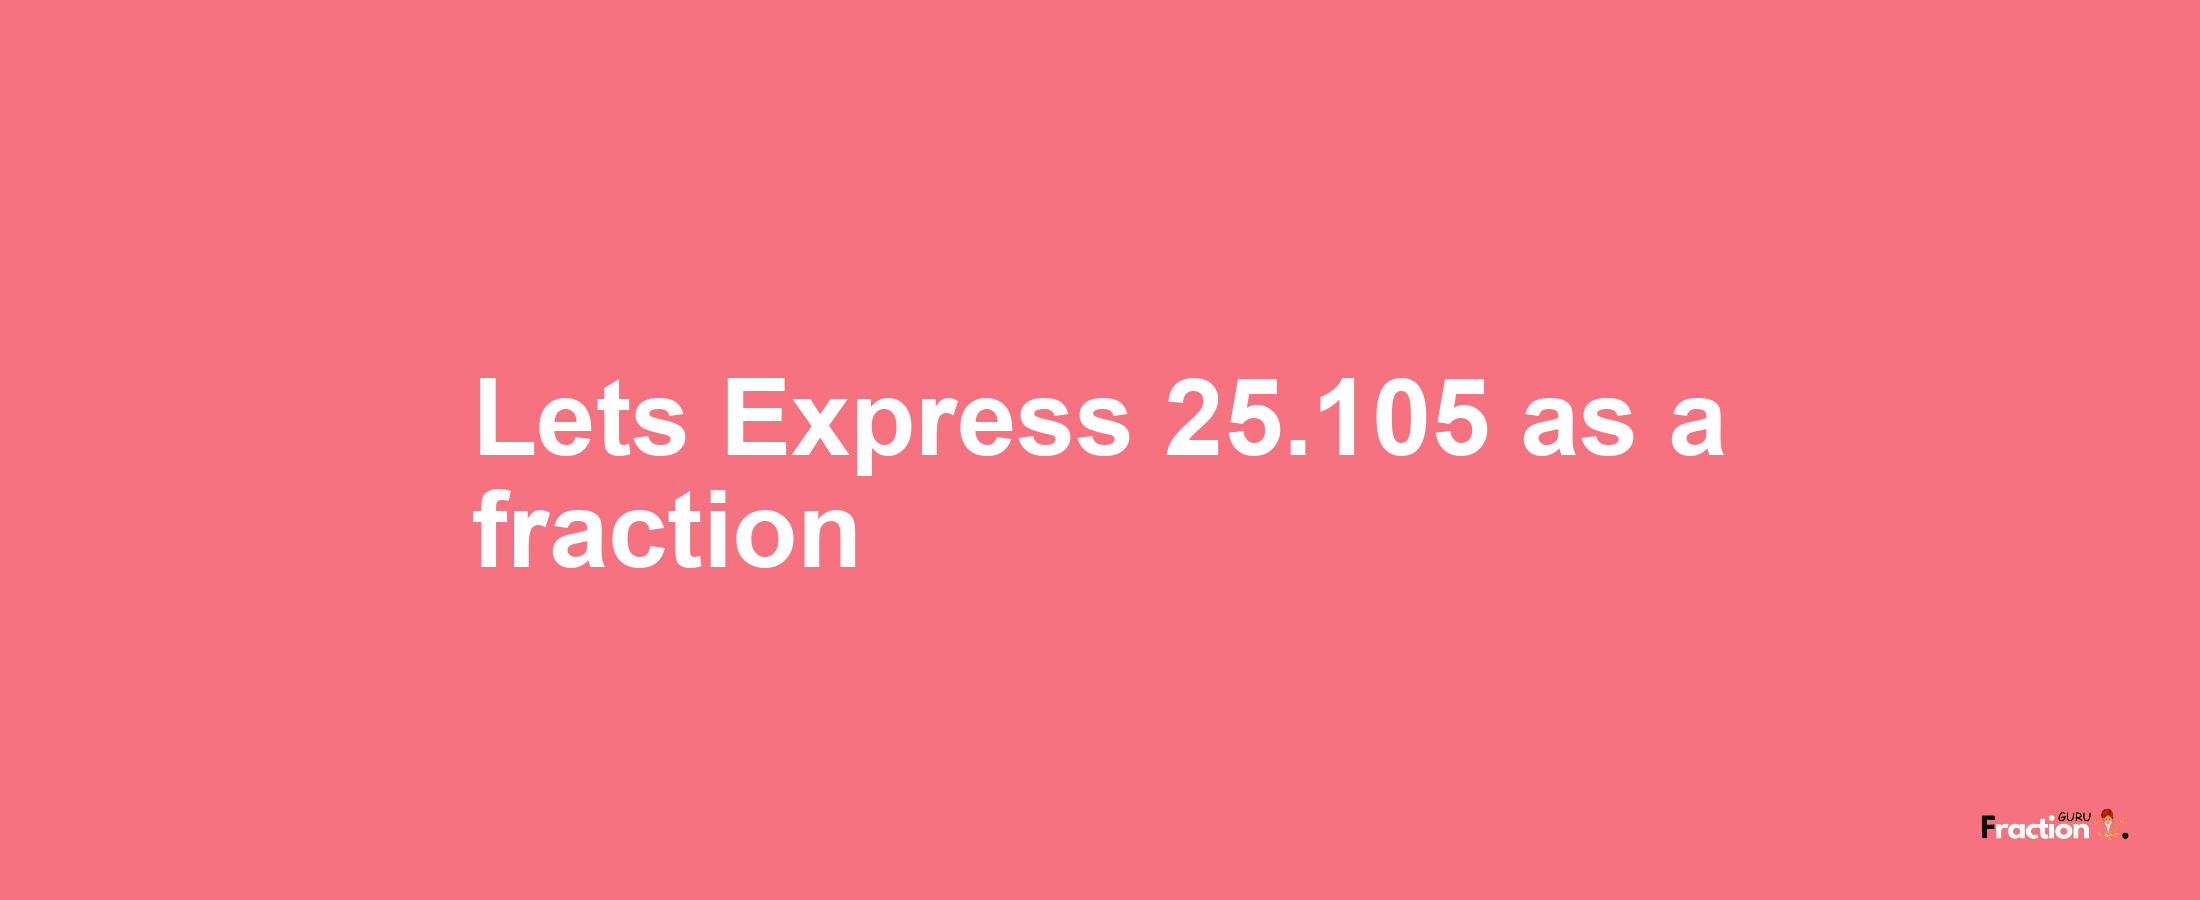 Lets Express 25.105 as afraction